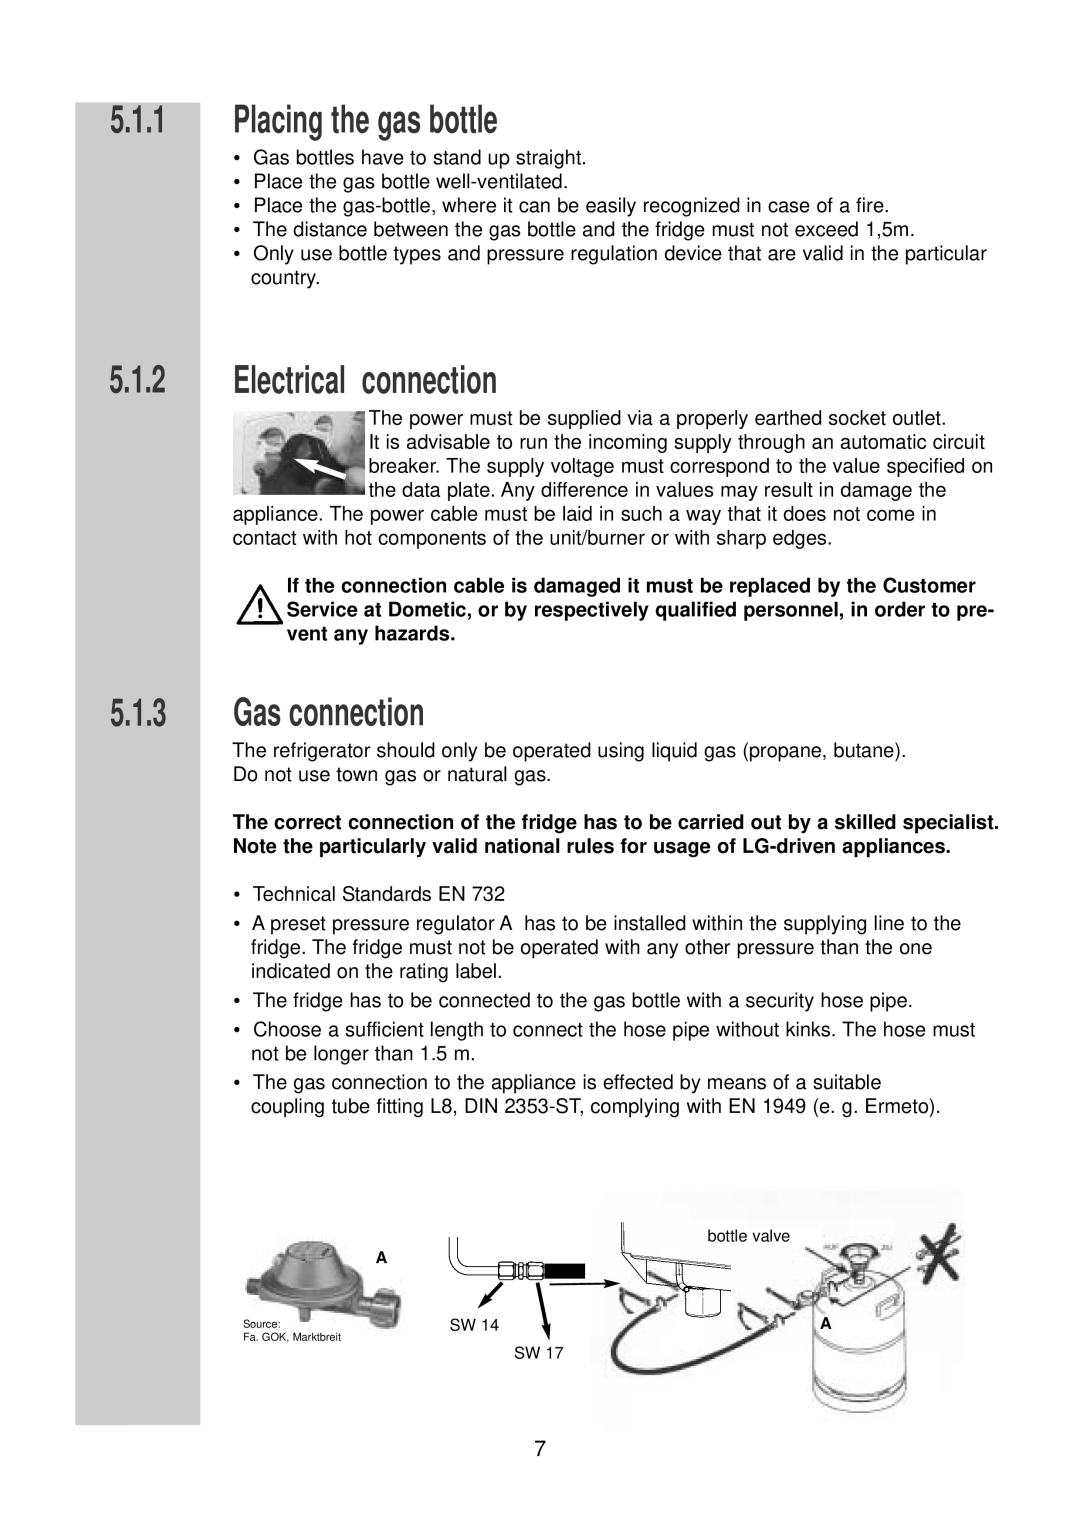 Dometic RGE 2000 installation instructions Placing the gas bottle, Electrical connection, Gas connection 